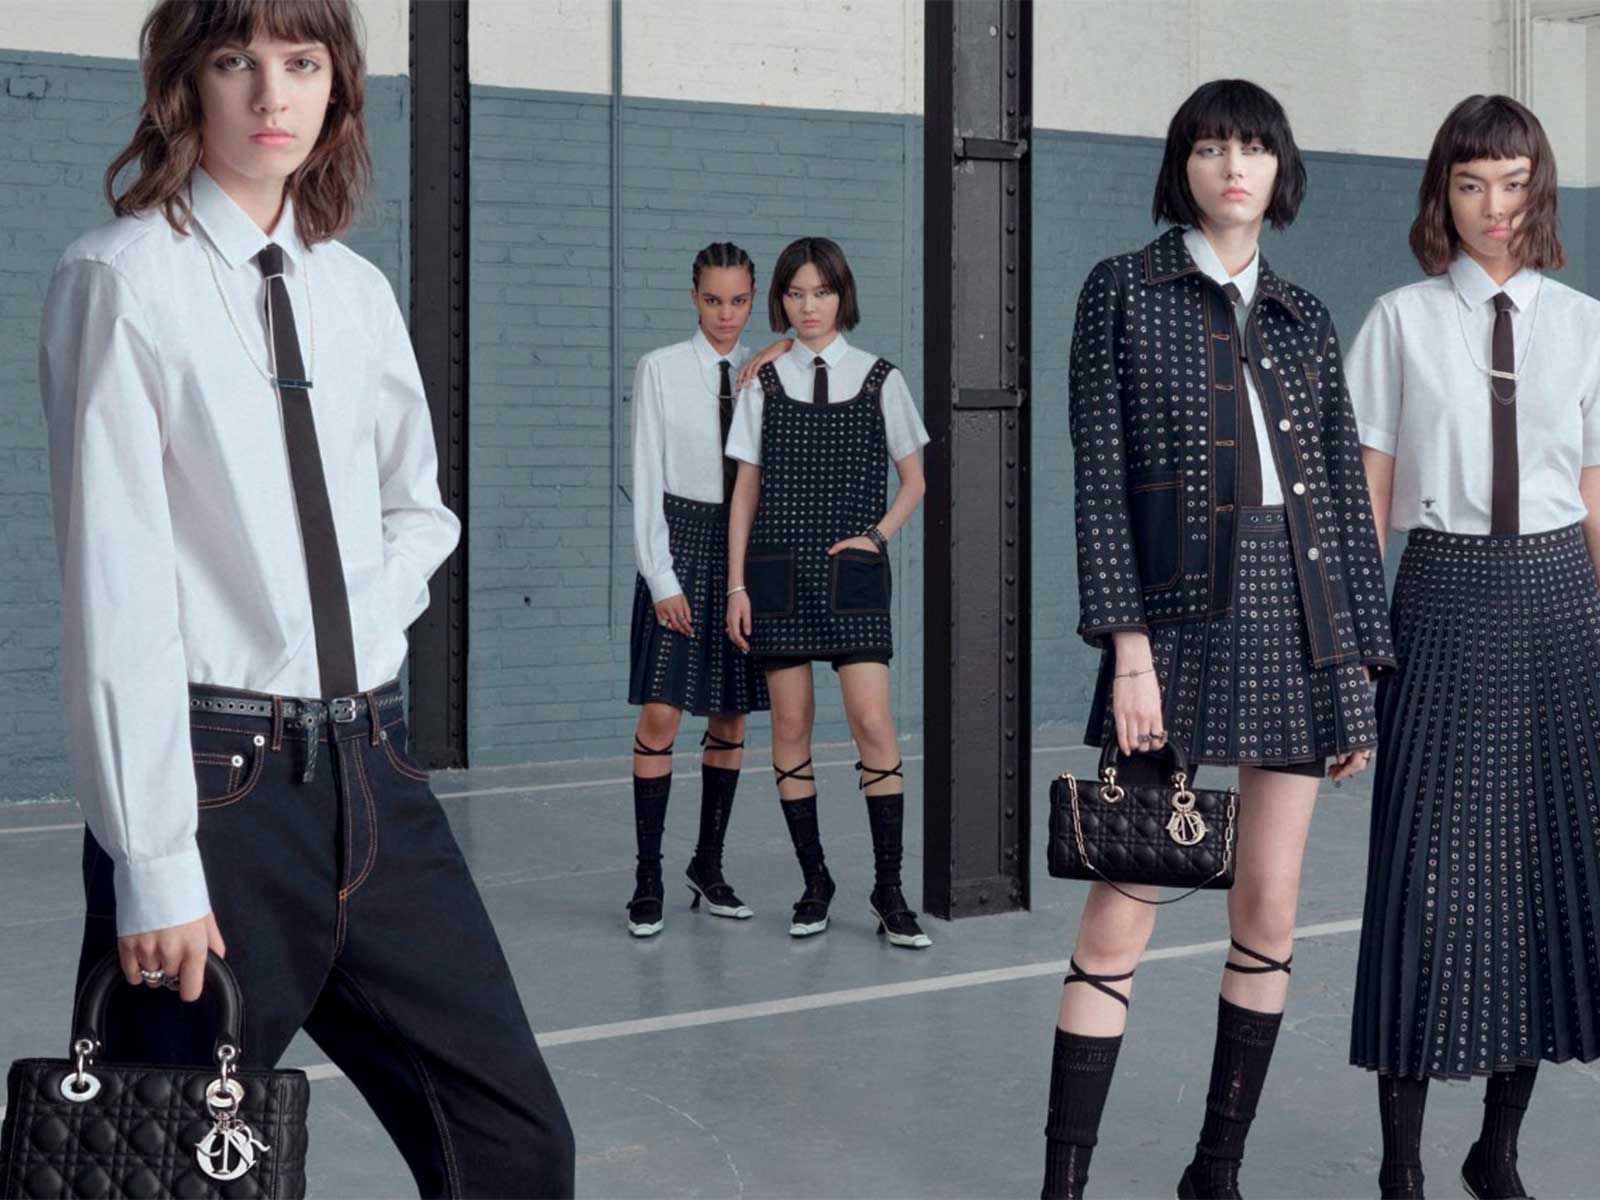 Dior FW22 explores the connections between past and future in latest campaign